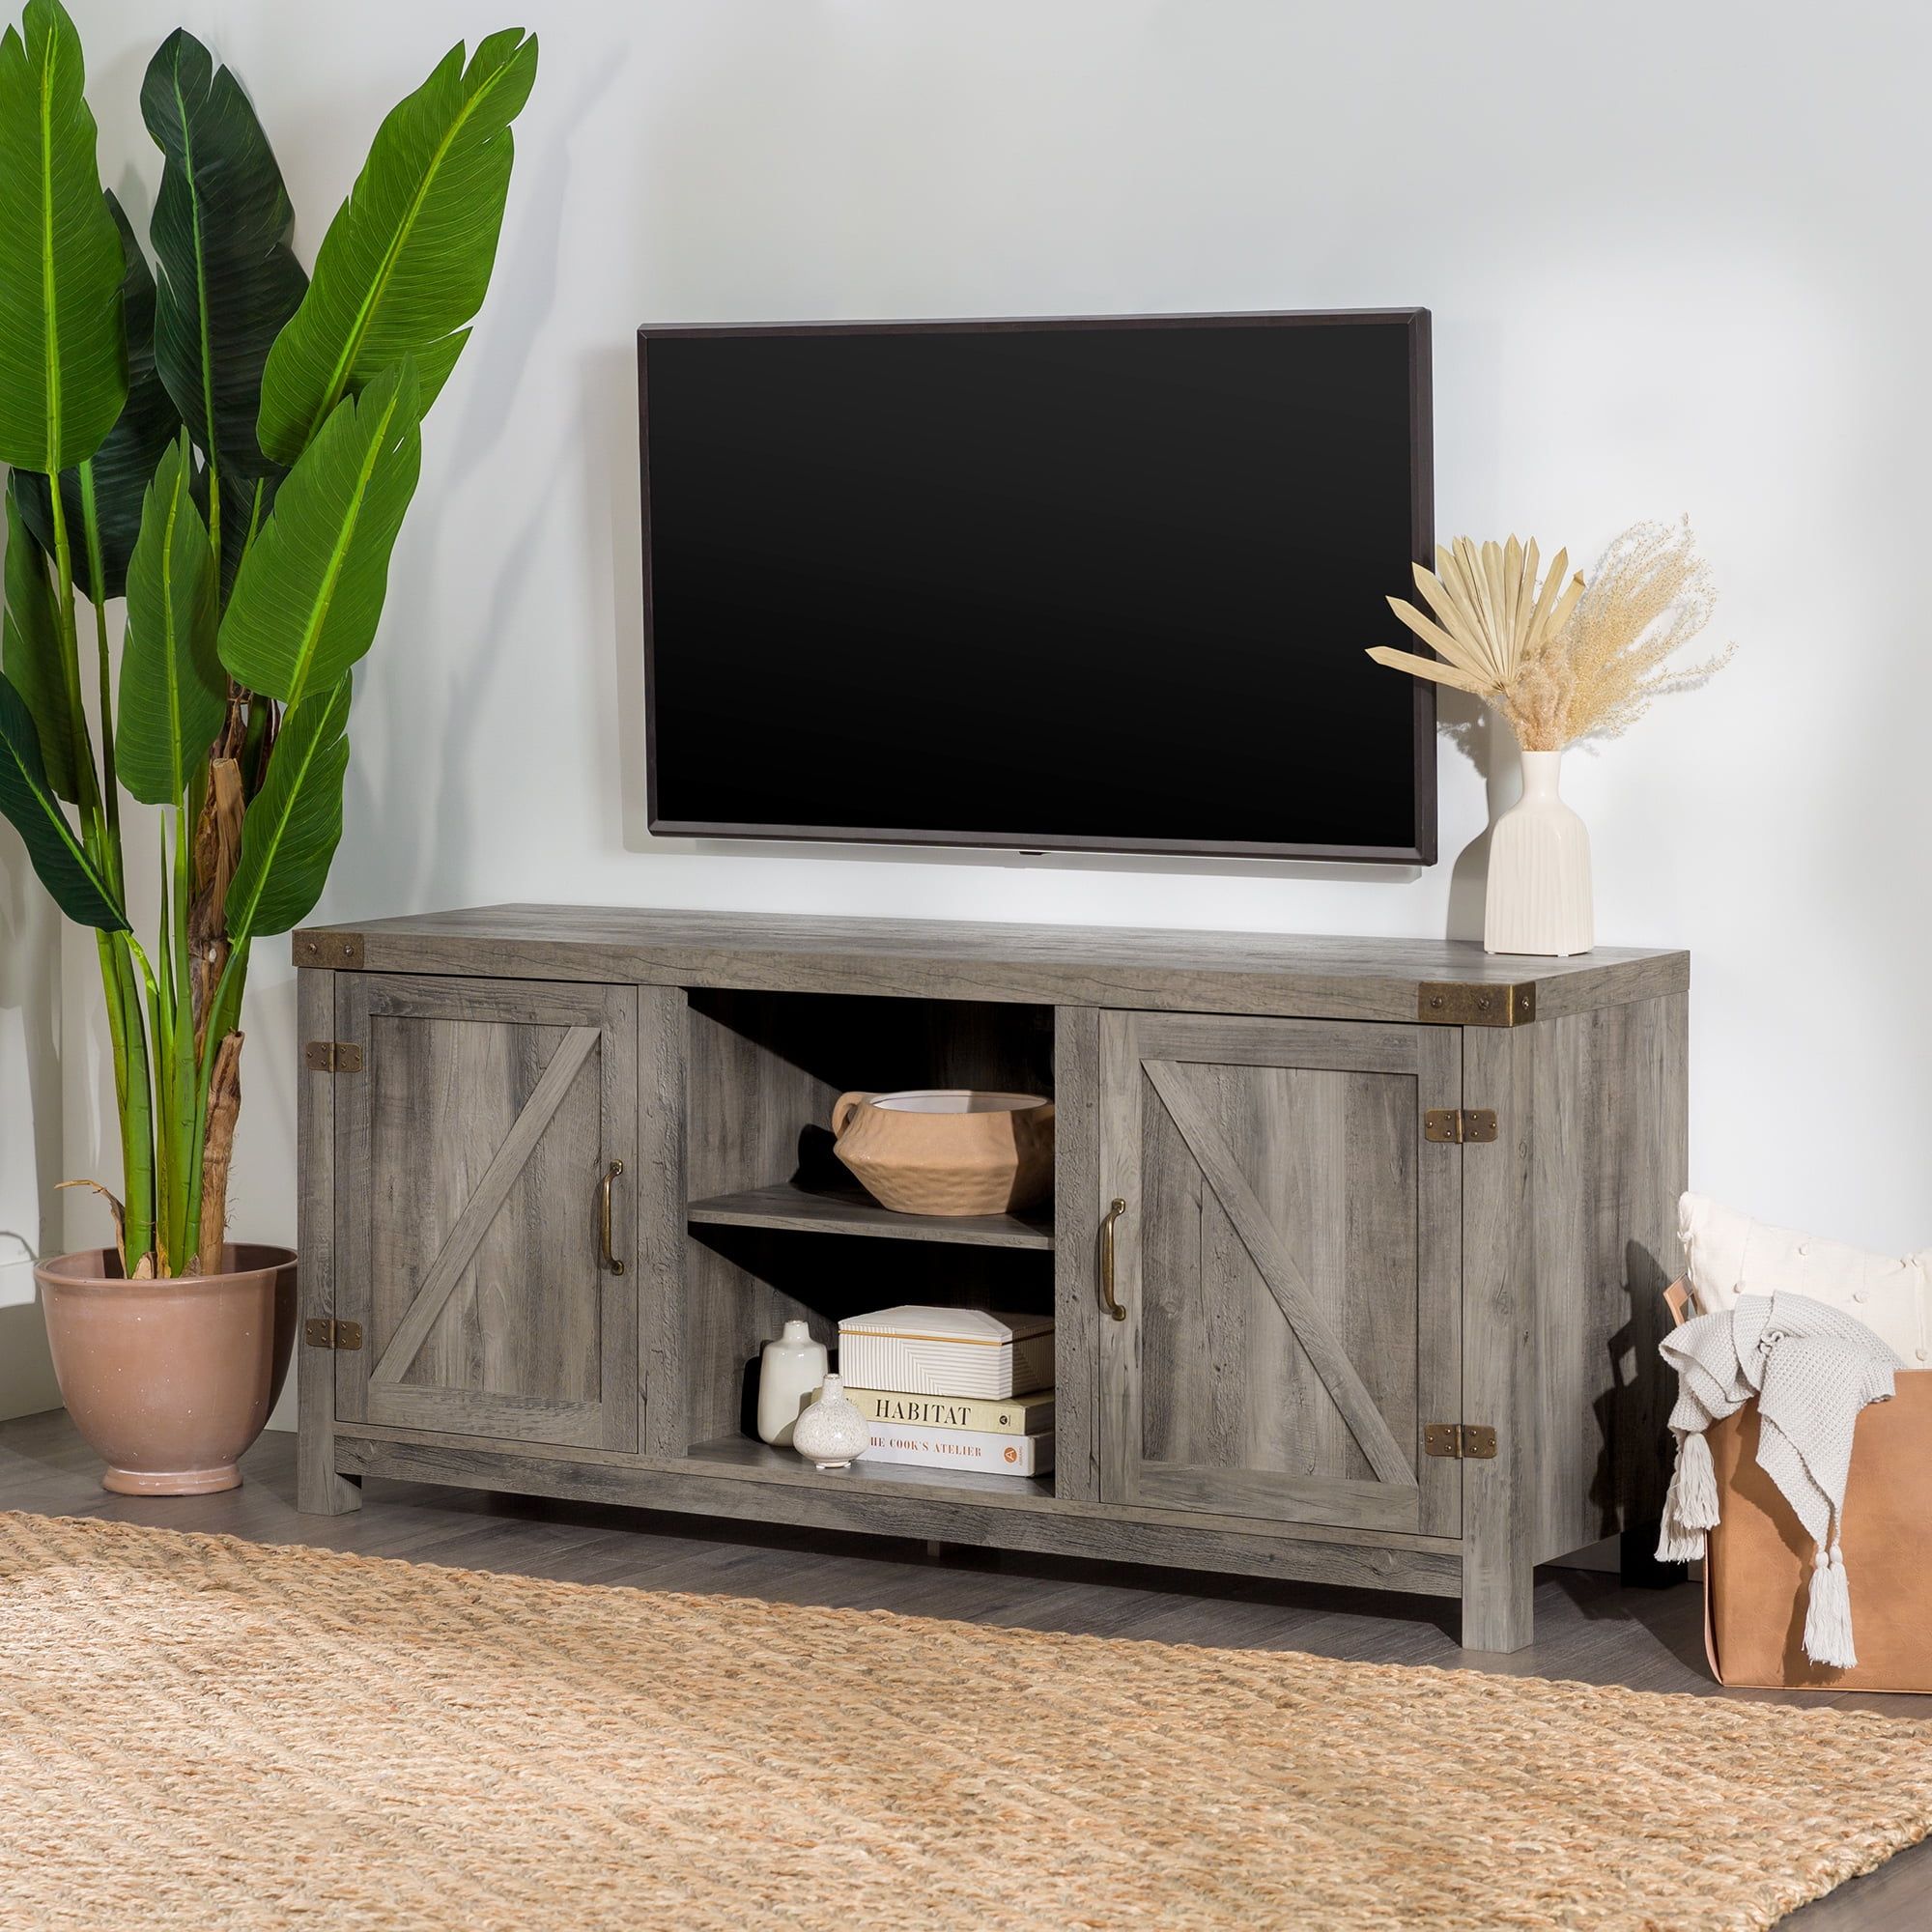 Woven Paths Modern Farmhouse Barn Door Tv Stand For Tvs Up To 65", Grey  Wash – Walmart Pertaining To Farmhouse Stands For Tvs (View 4 of 15)